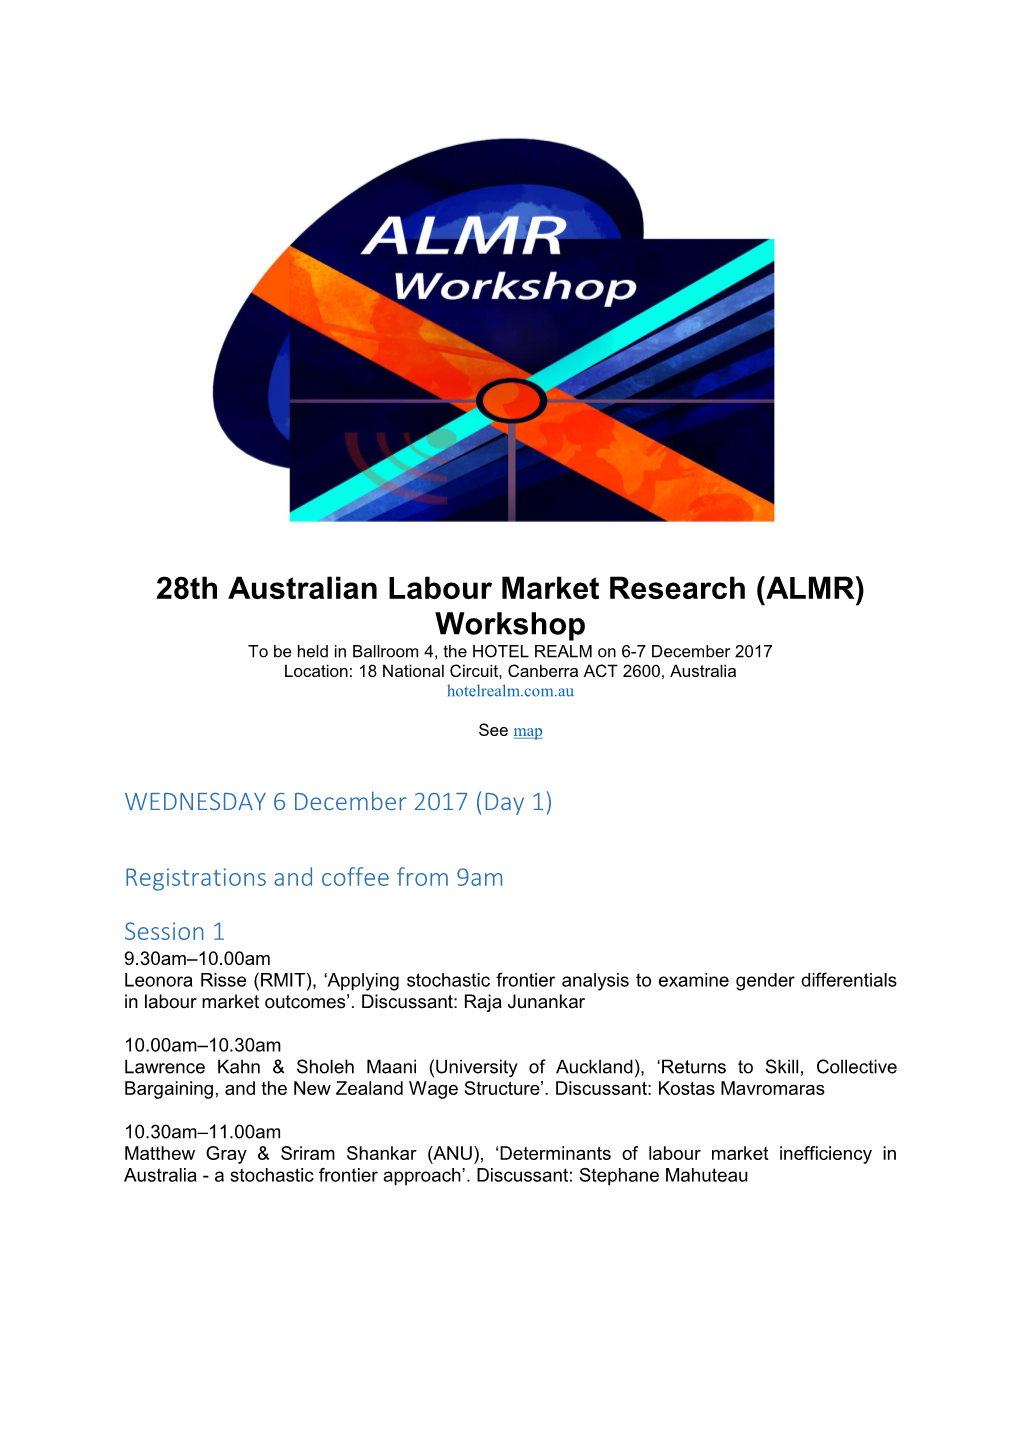 (ALMR) Workshop to Be Held in Ballroom 4, the HOTEL REALM on 6-7 December 2017 Location: 18 National Circuit, Canberra ACT 2600, Australia Hotelrealm.Com.Au